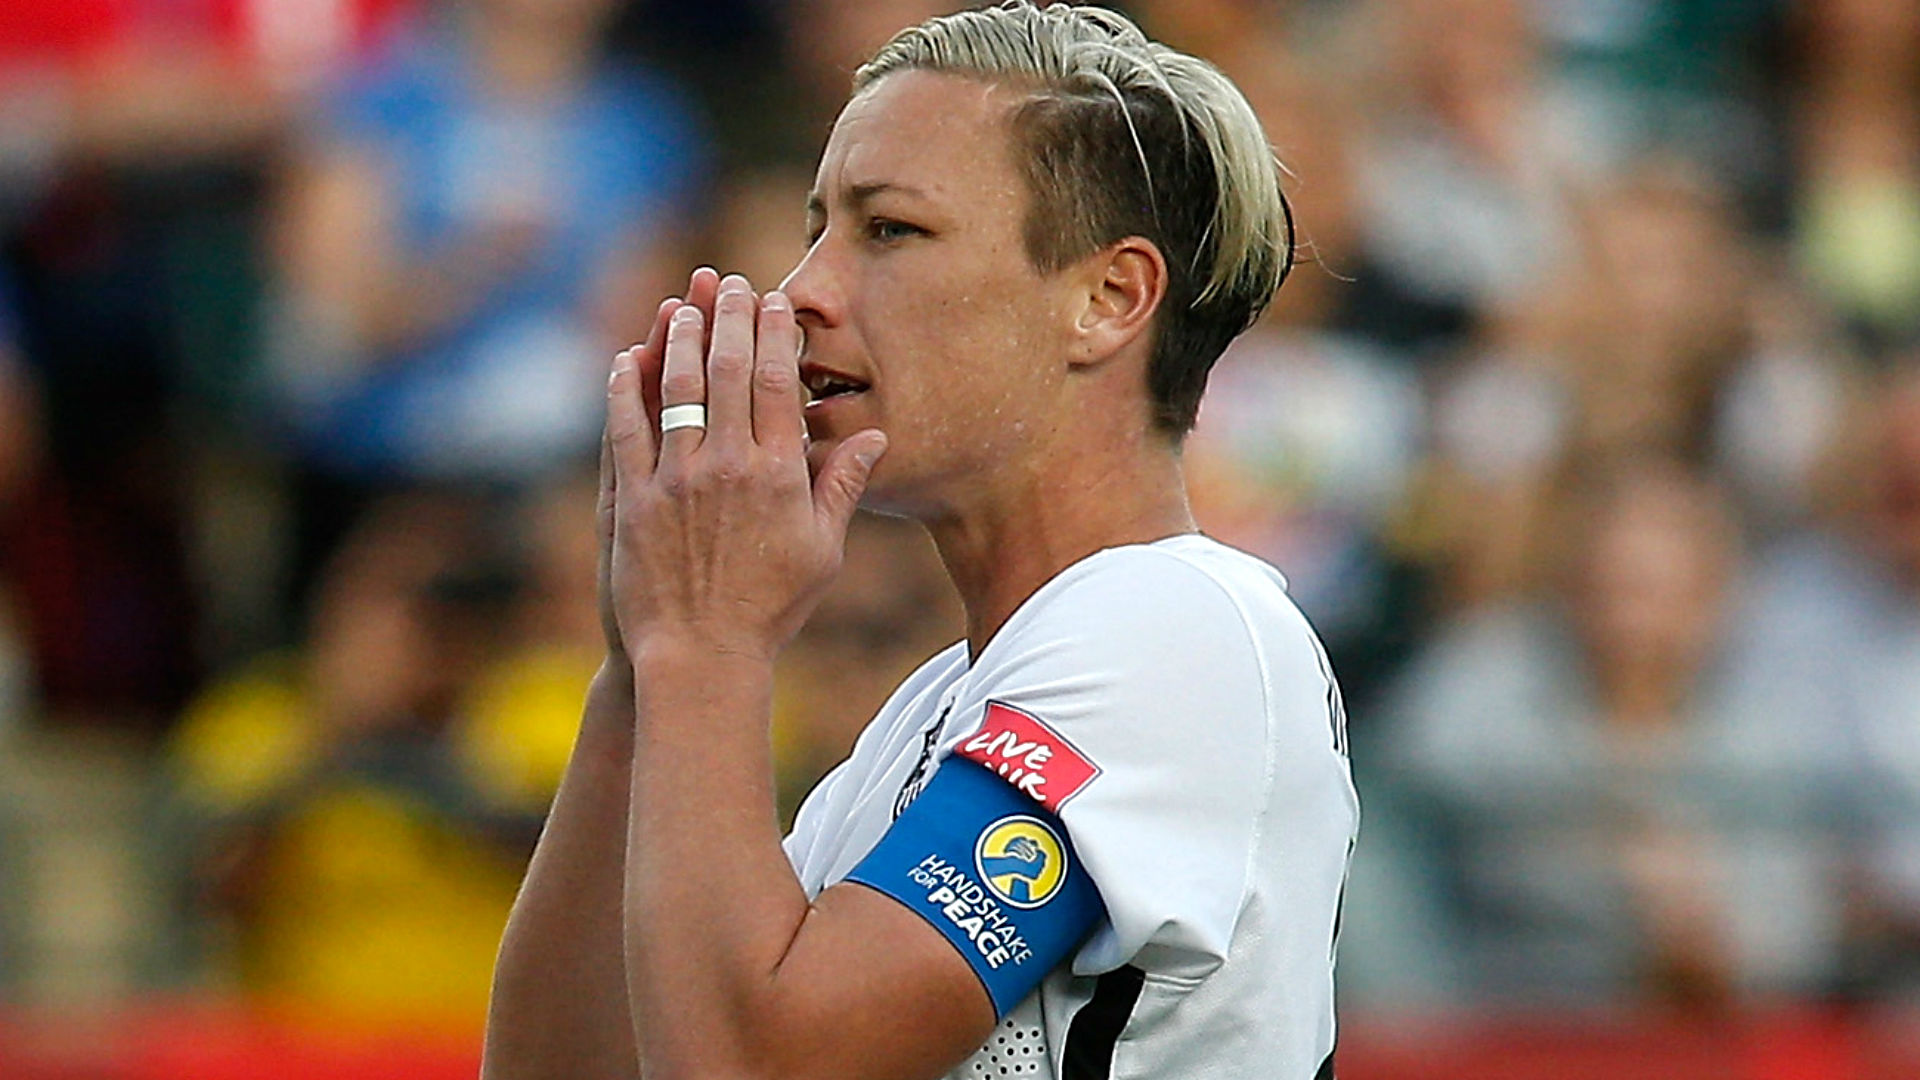 Abby Wambach S Dui Arrest Could Hurt Women Soccer And That